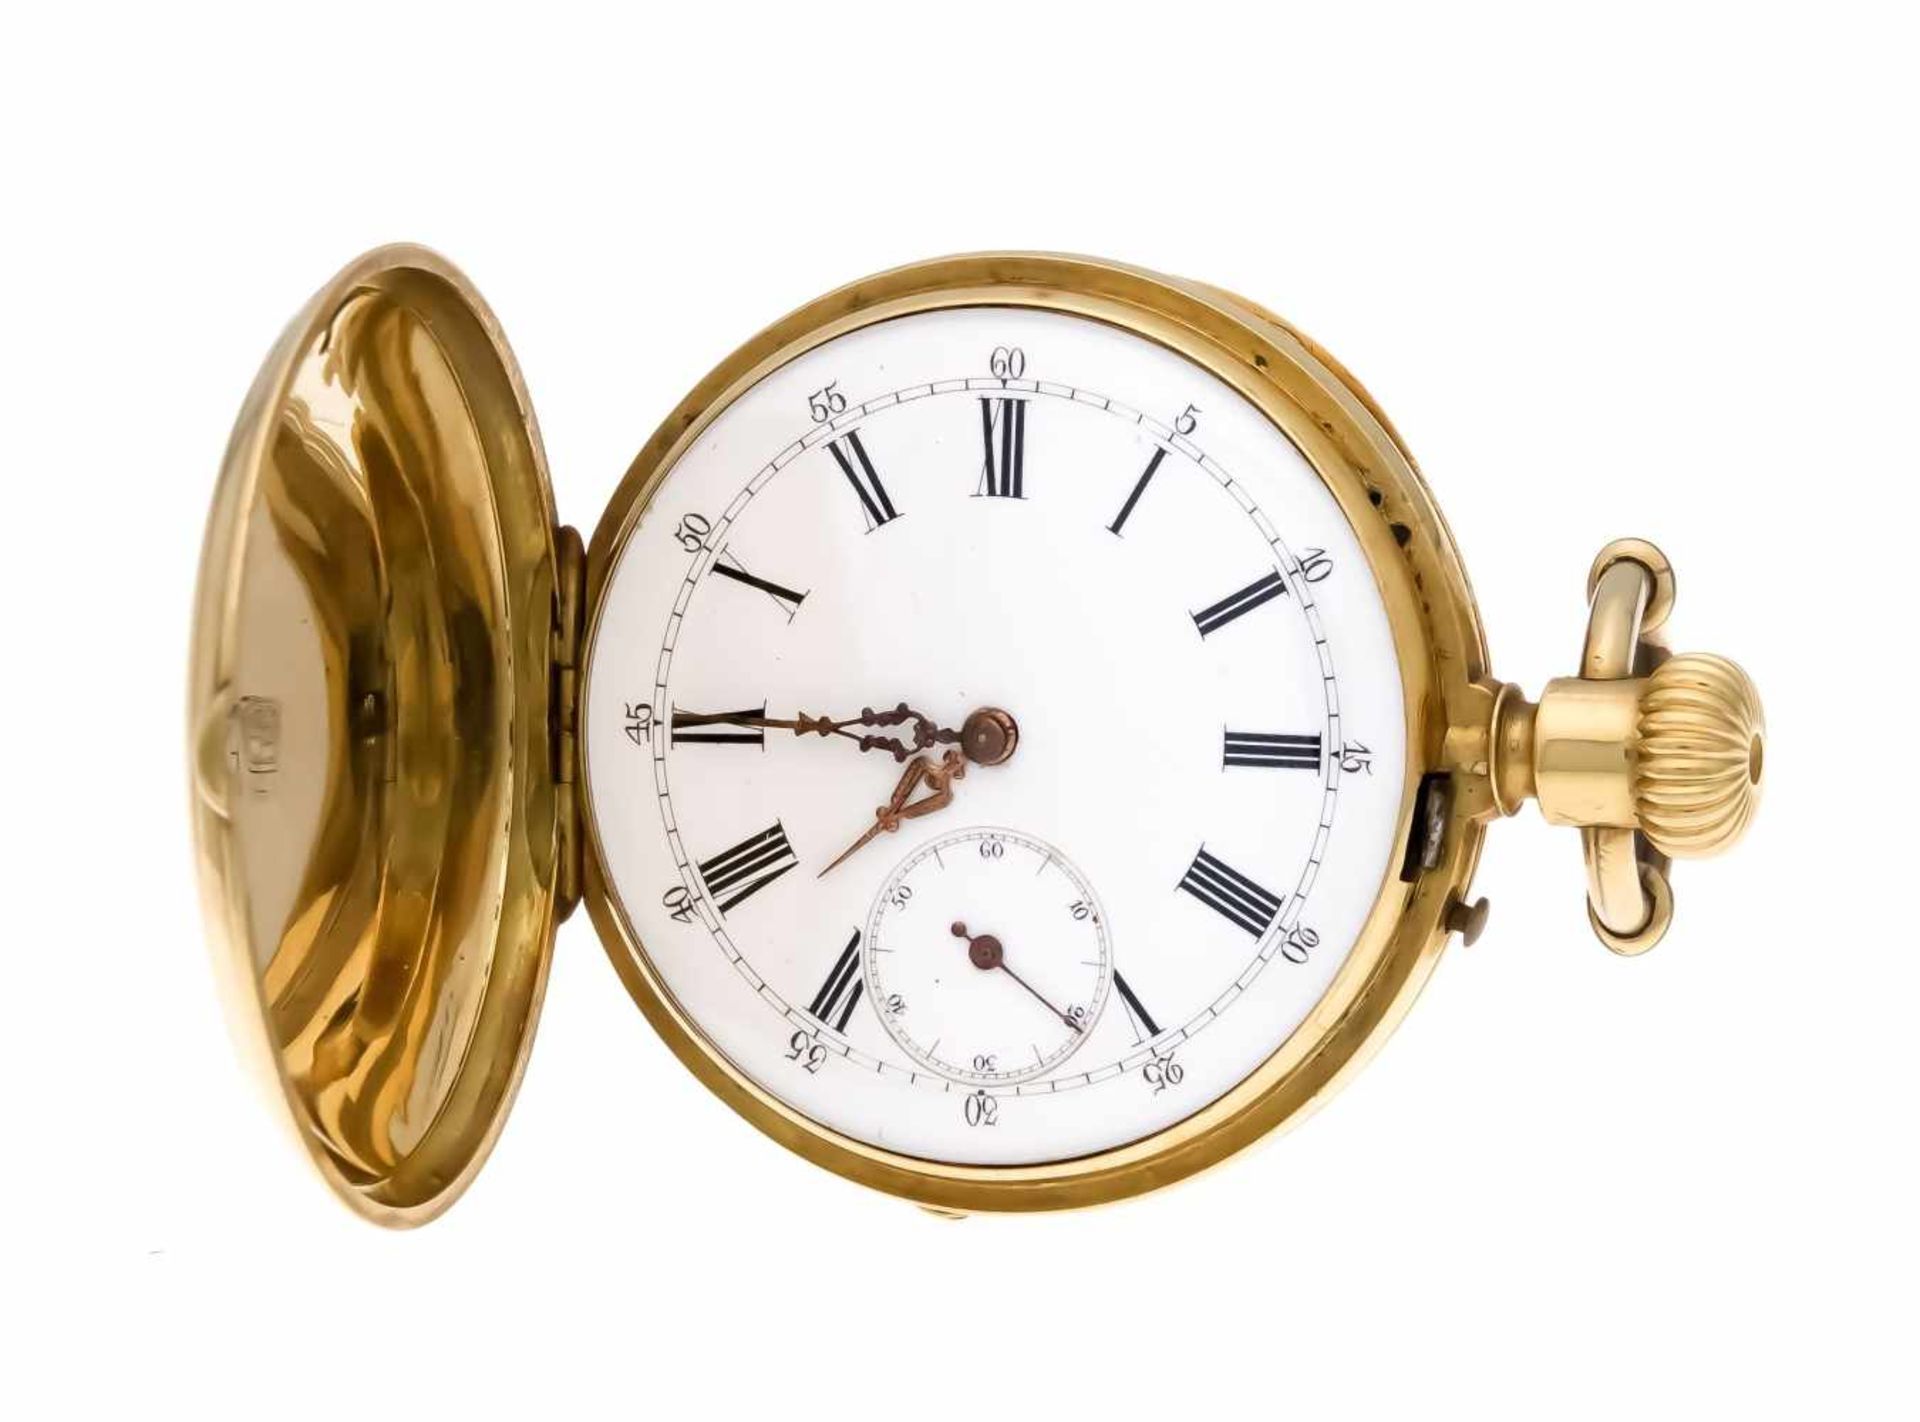 Men's pocket watch spring cover yellow gold / 750, 3 covers gold, anchor movement is